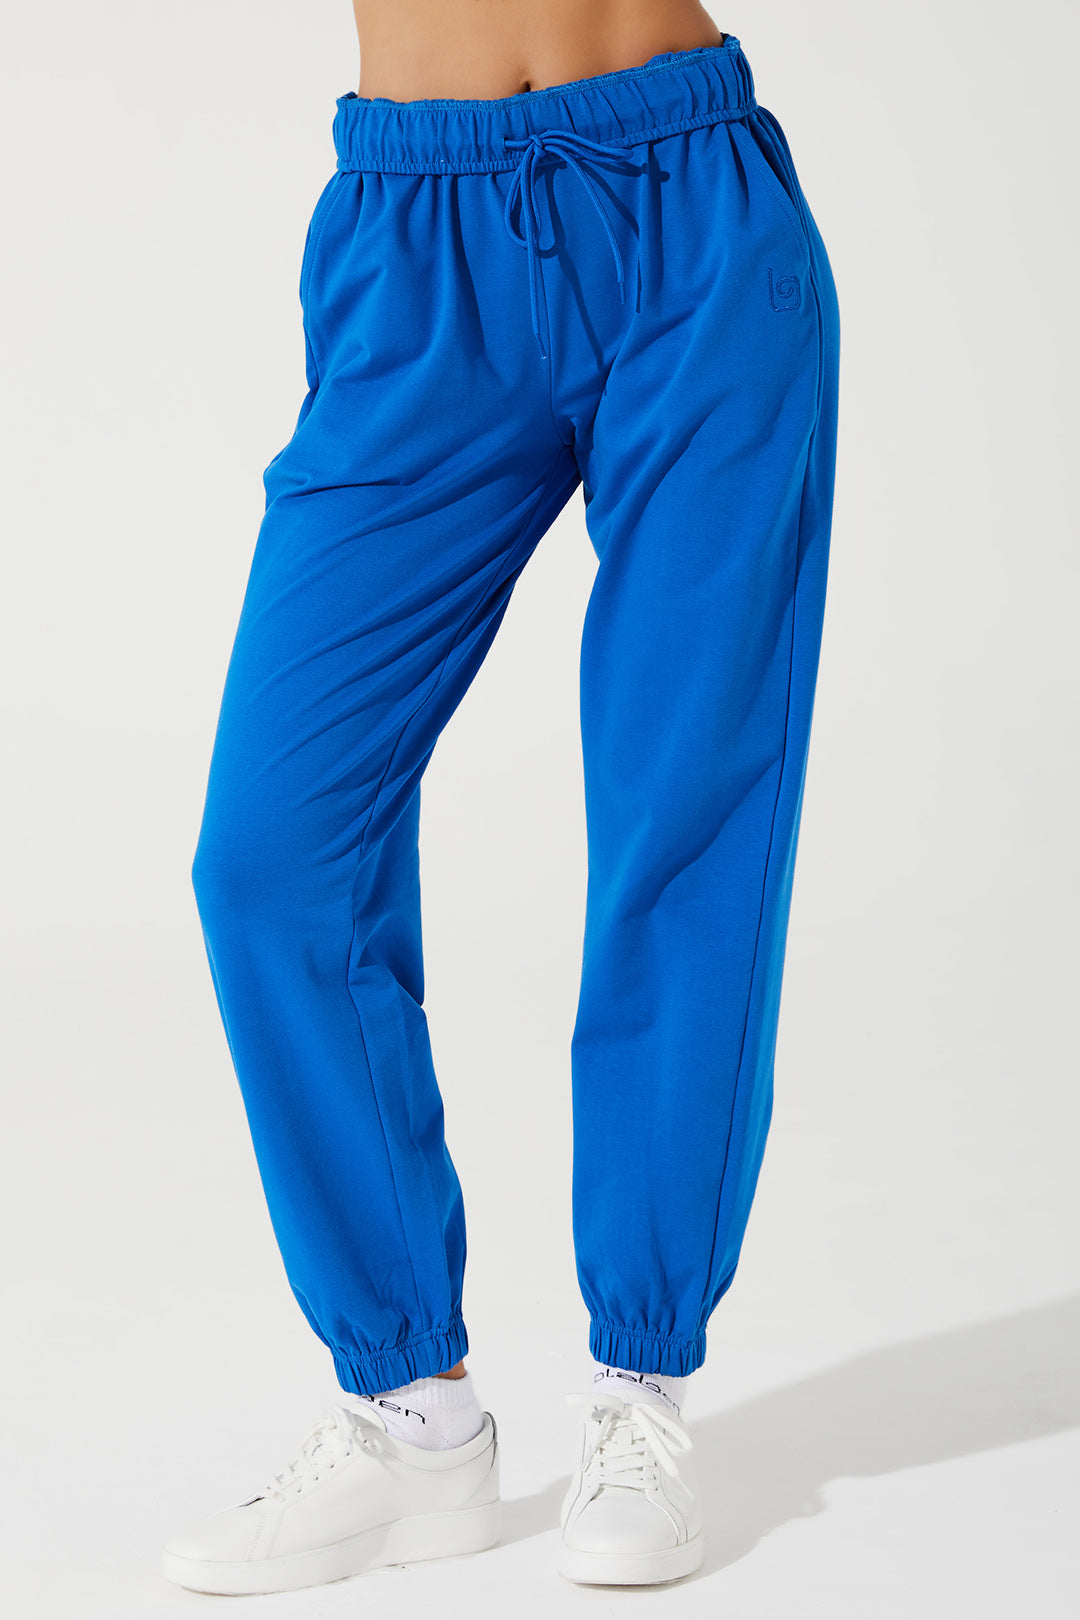 Janet wearing Atlantis Blue sweatpants for women, style OW-0036-WSW-BL, in a 2nd image.